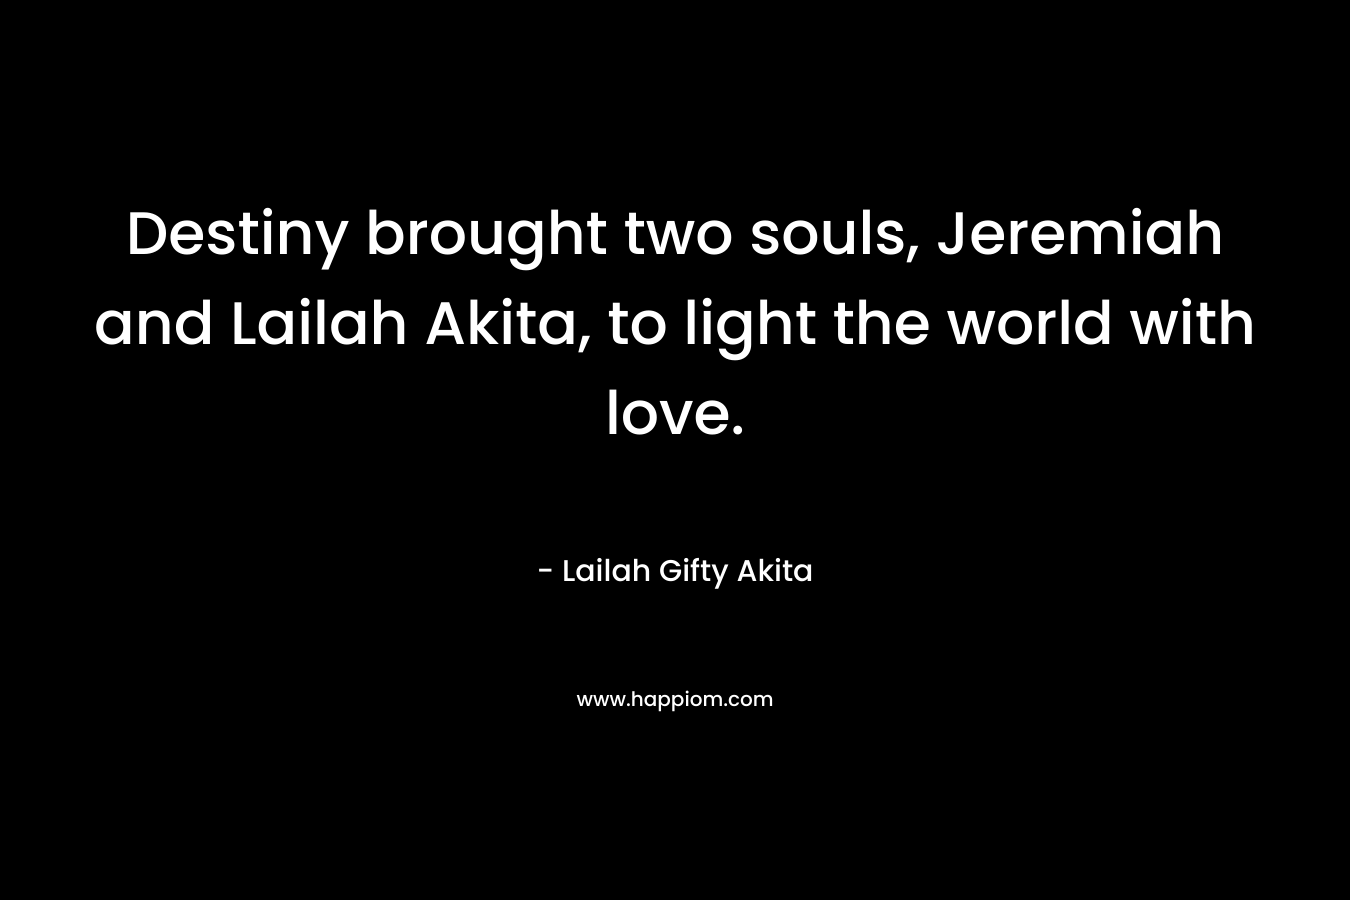 Destiny brought two souls, Jeremiah and Lailah Akita, to light the world with love. – Lailah Gifty Akita